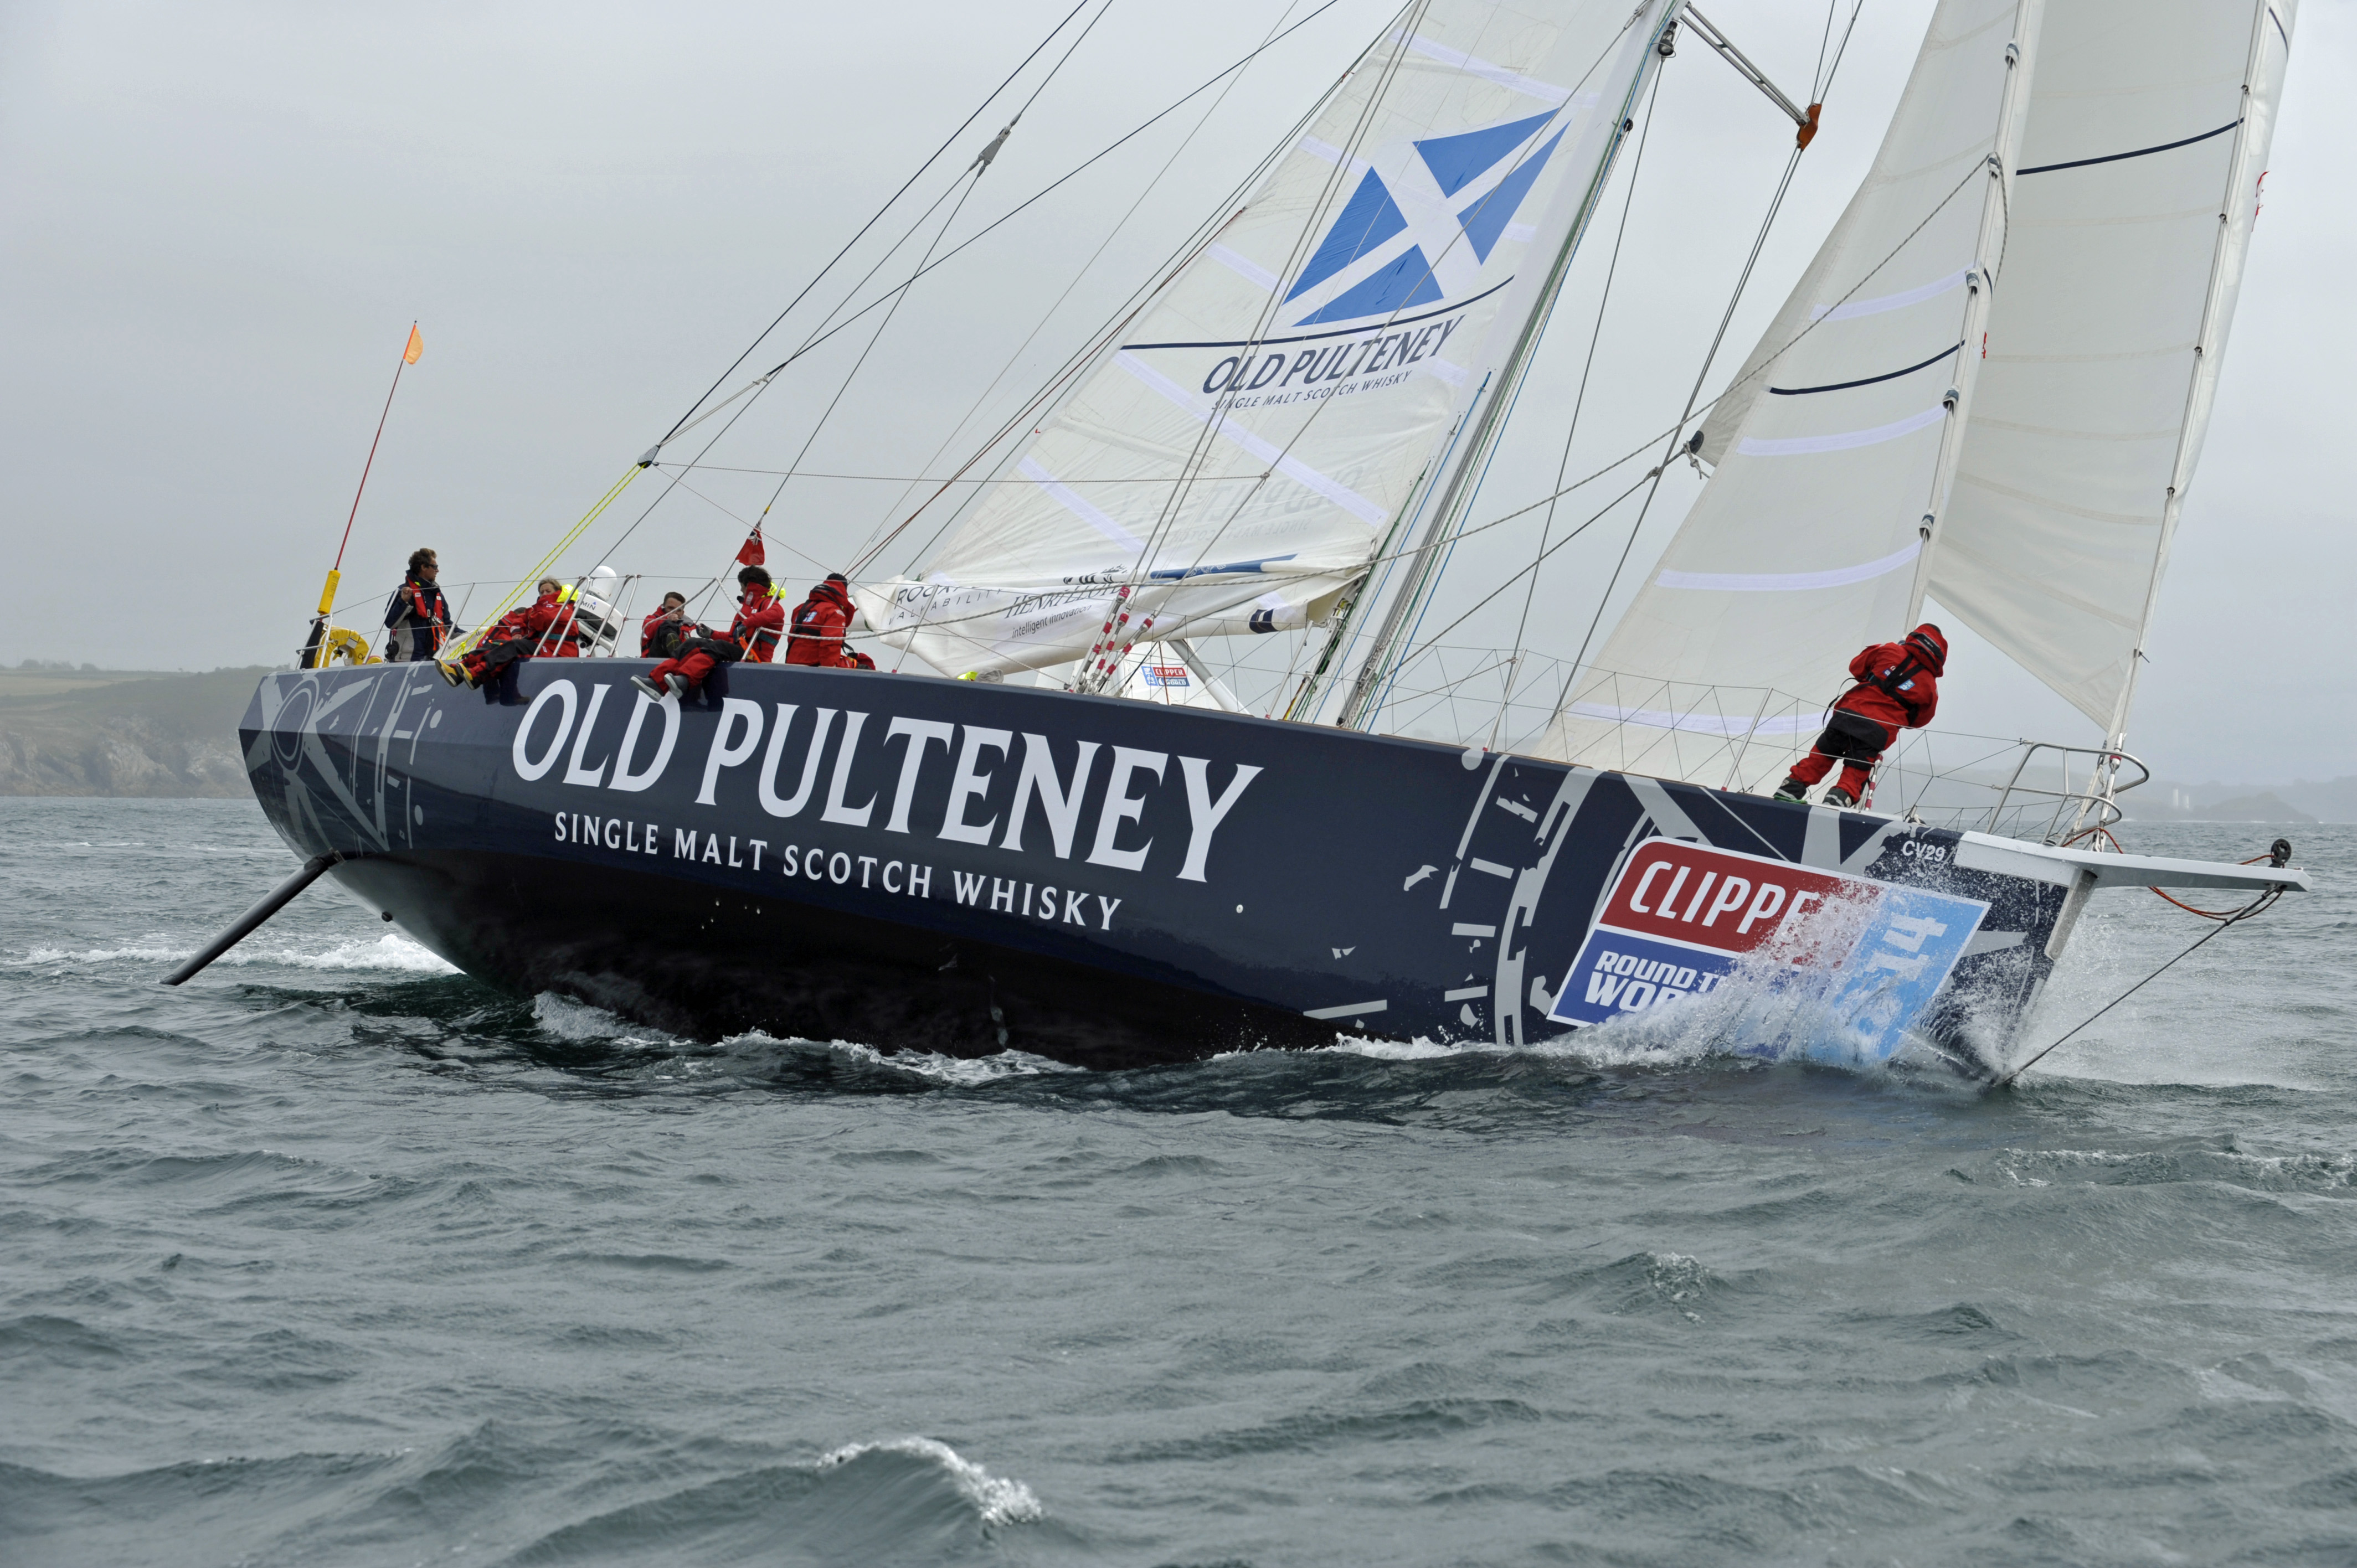 Old Pulteney takes part in the Clipper 2013-14 Race